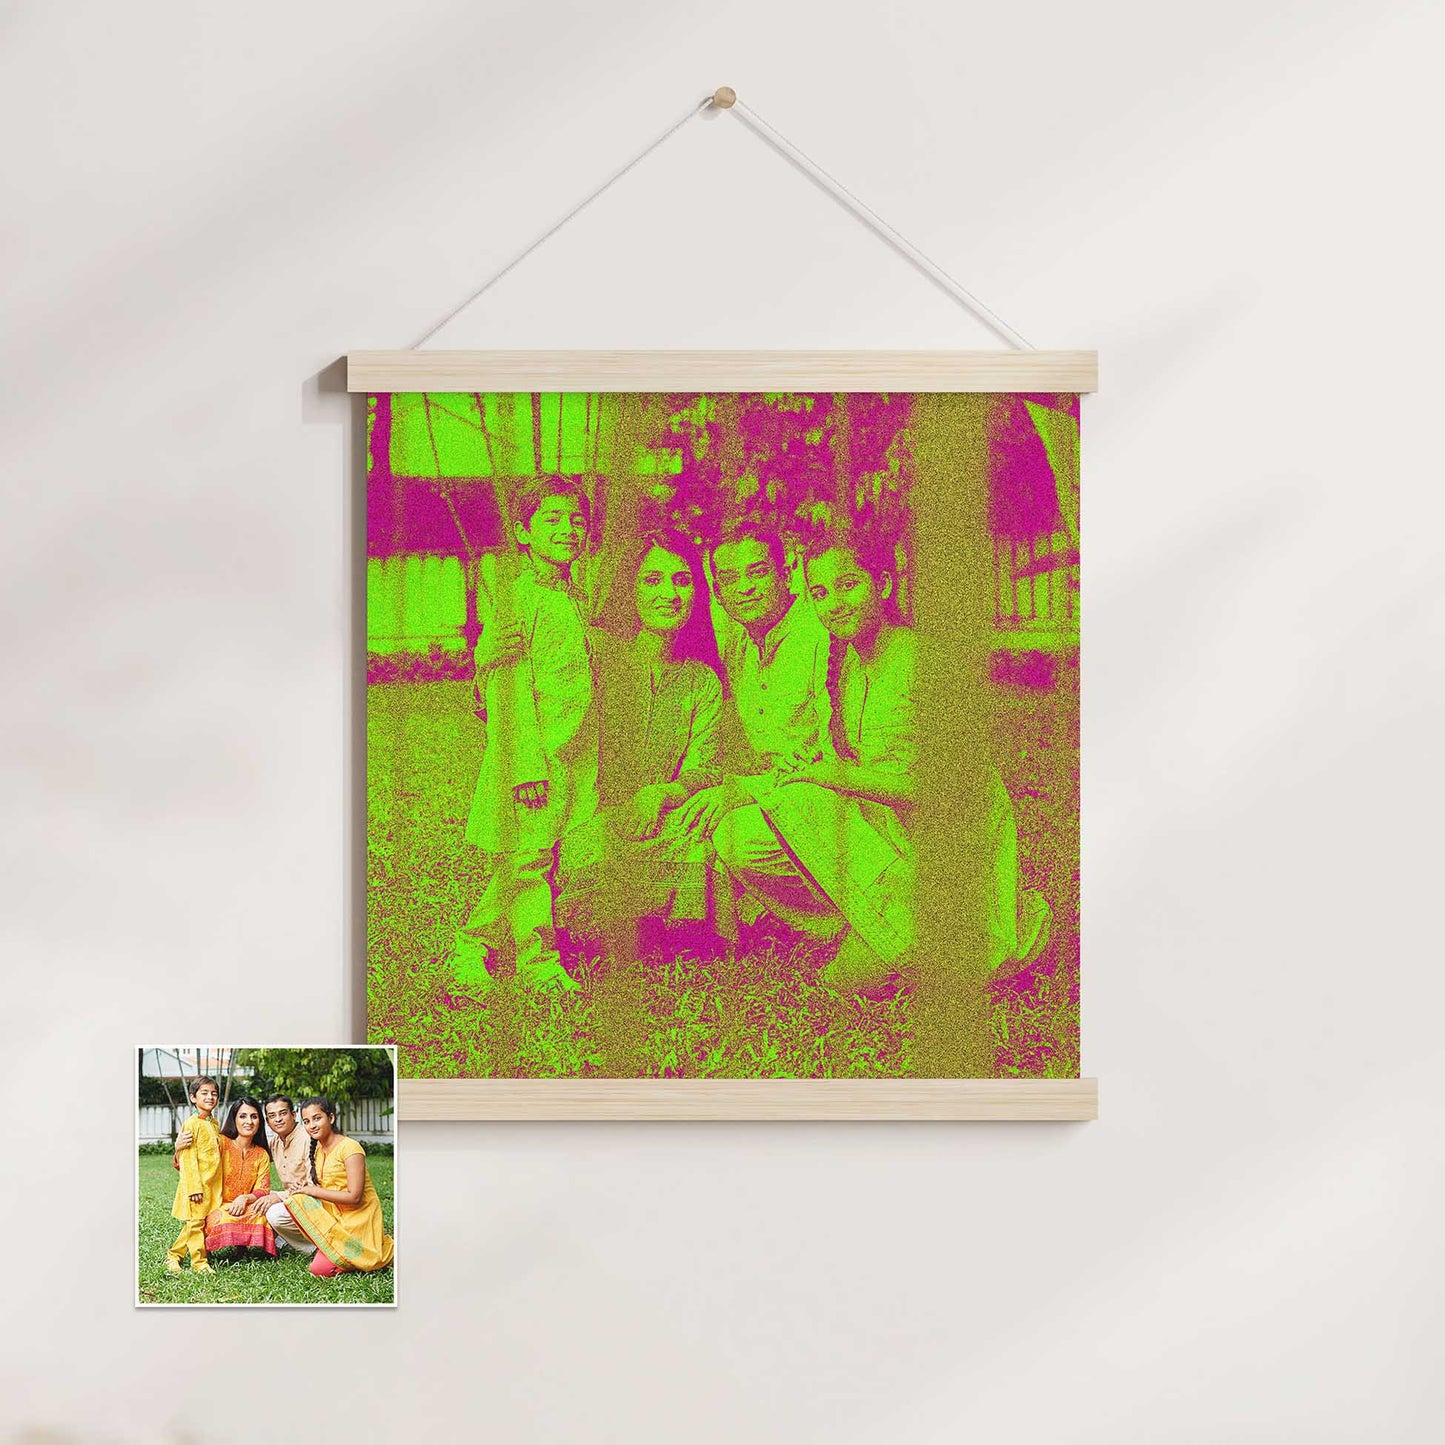 Elevate your decor with our Personalised Neon Green Poster Hanger. With its neon green color and cool texture, it brings a bold and vibrant statement to any interior. Crafted on high-quality gallery paper and elegantly framed with a natural wood